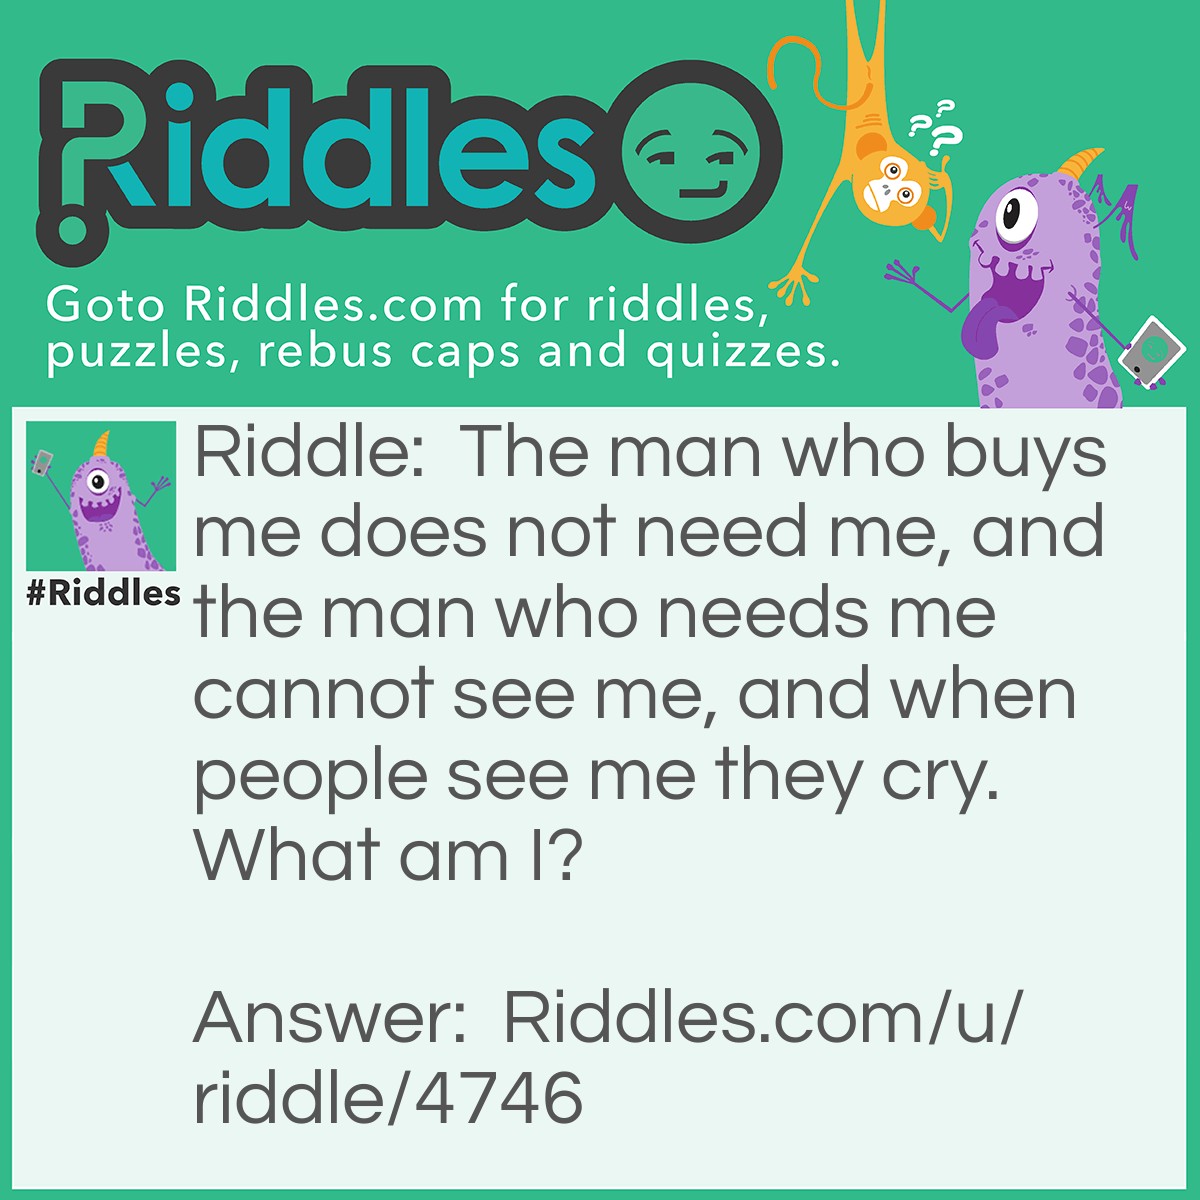 Riddle: The man who buys me does not need me, and the man who needs me cannot see me, and when people see me they cry. What am I? Answer: I am a coffin.